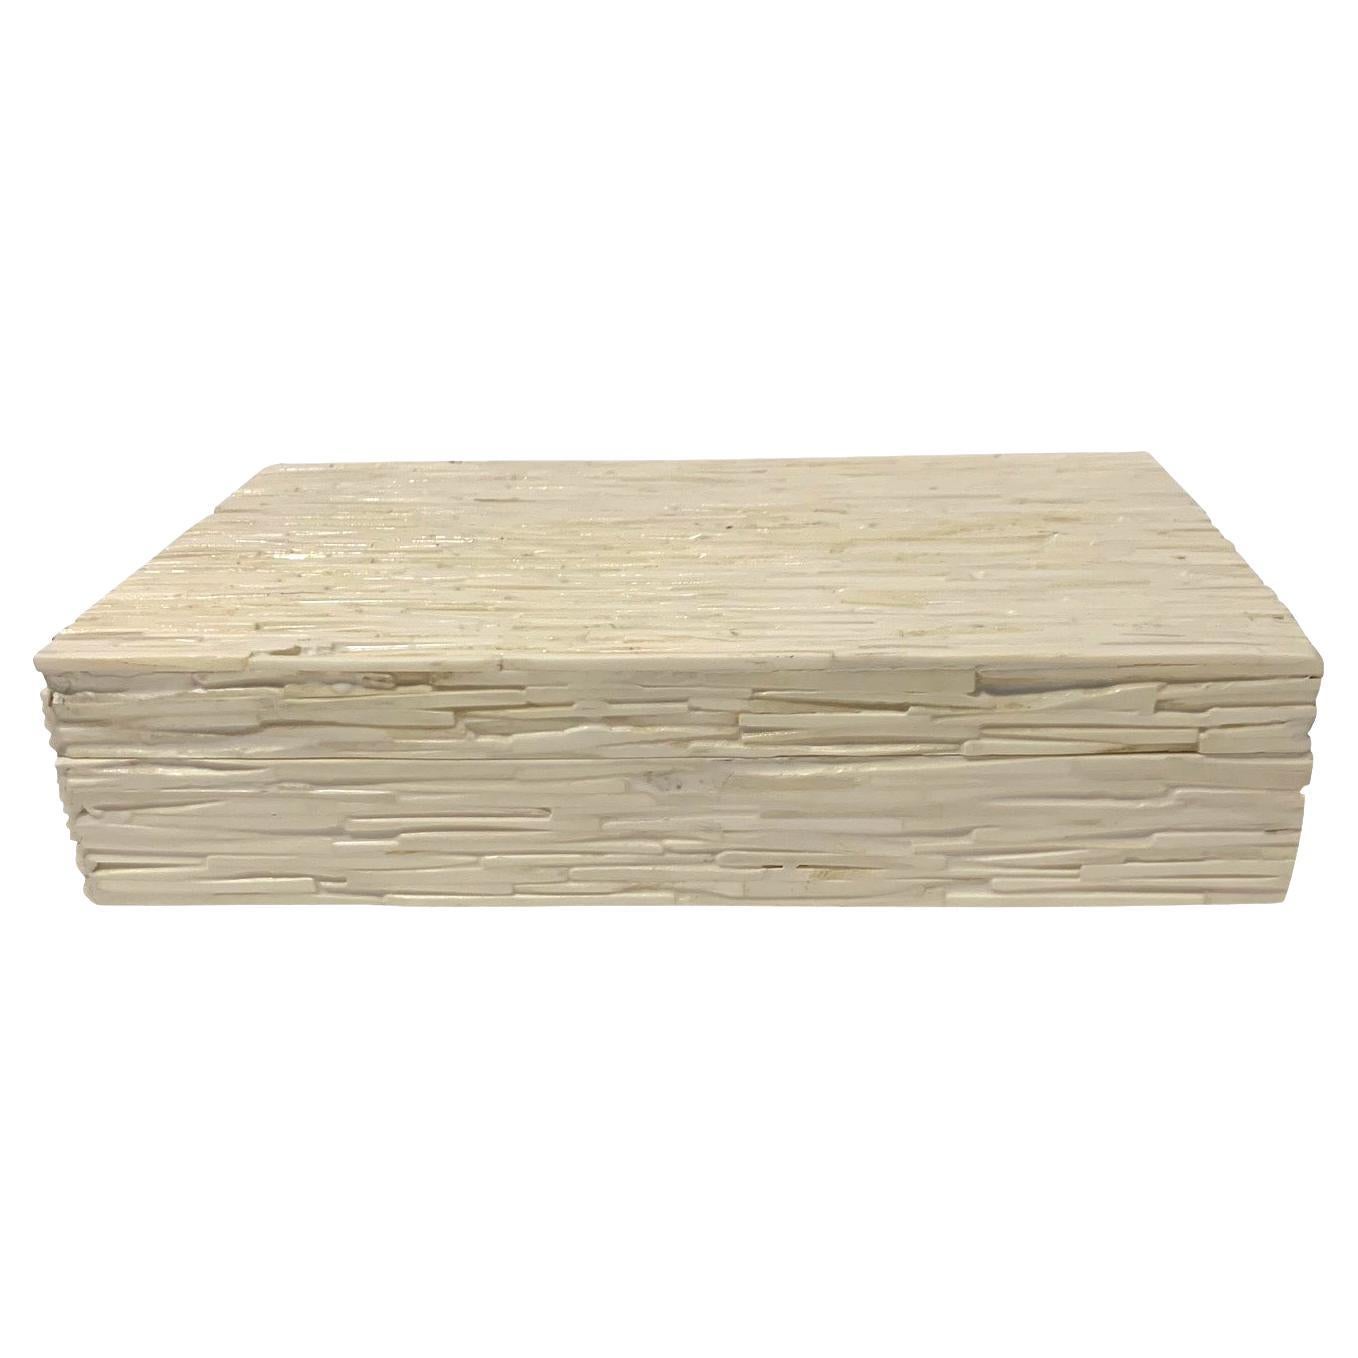 Contemporary Indian natural cream colored lidded bone box.
Composed of a mosaic of slices of bone.
Also available in a smaller size ( S6532 ).
Part of a large collection of bone boxes.